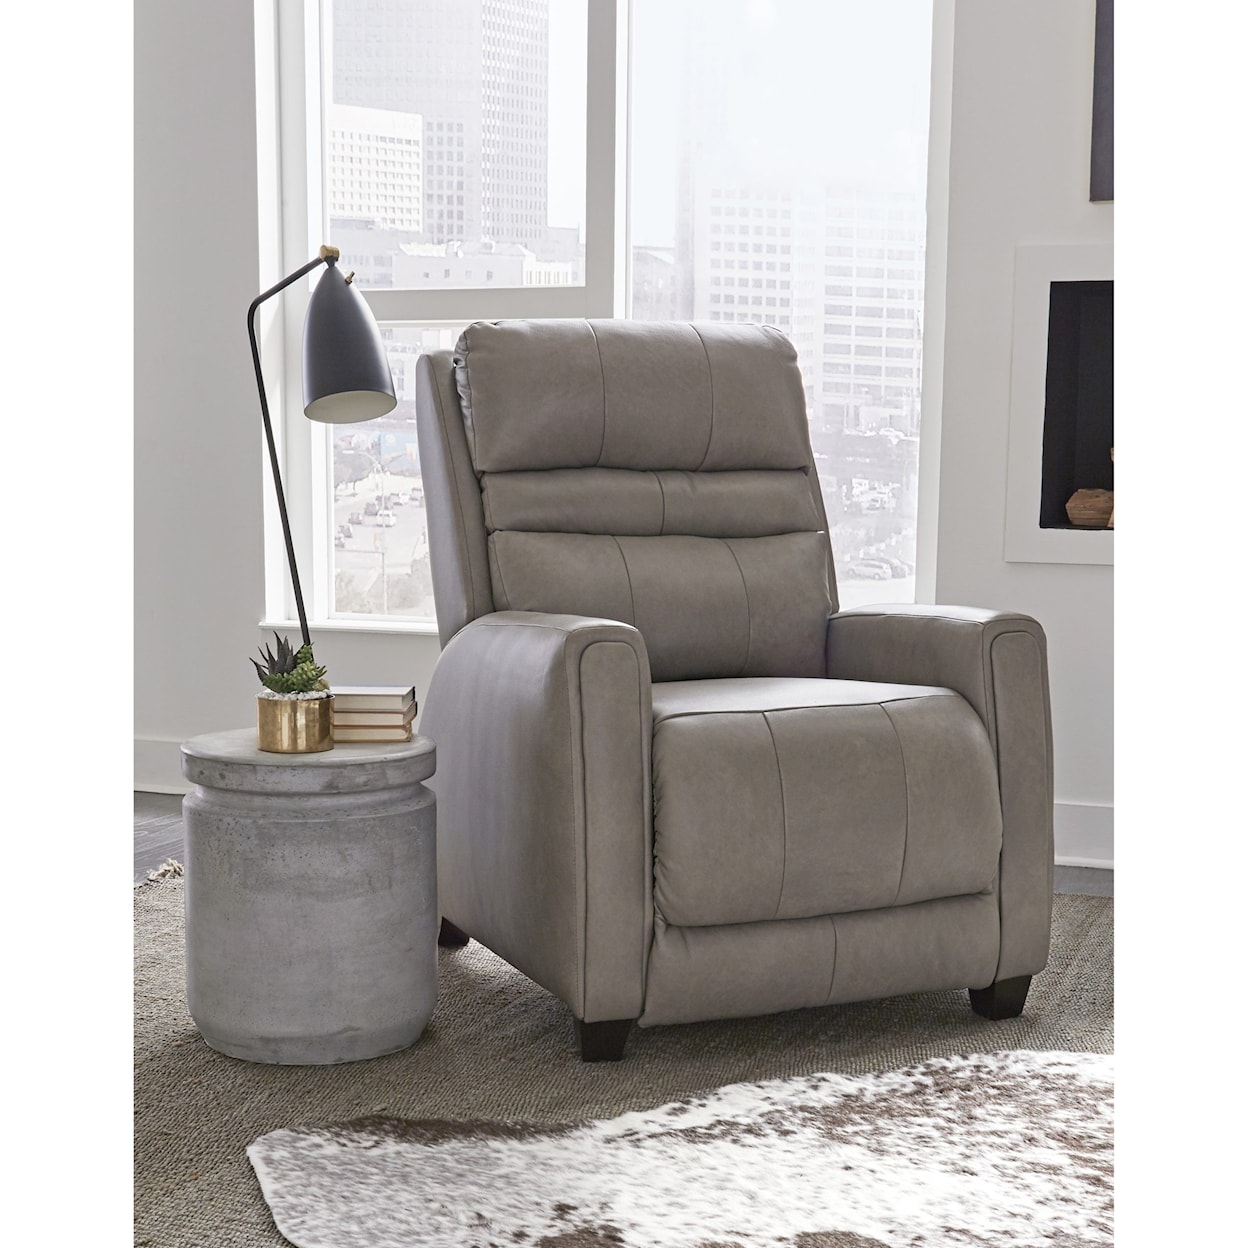 Southern Motion Turbo Zero Gravity Recliner with Power Headrest